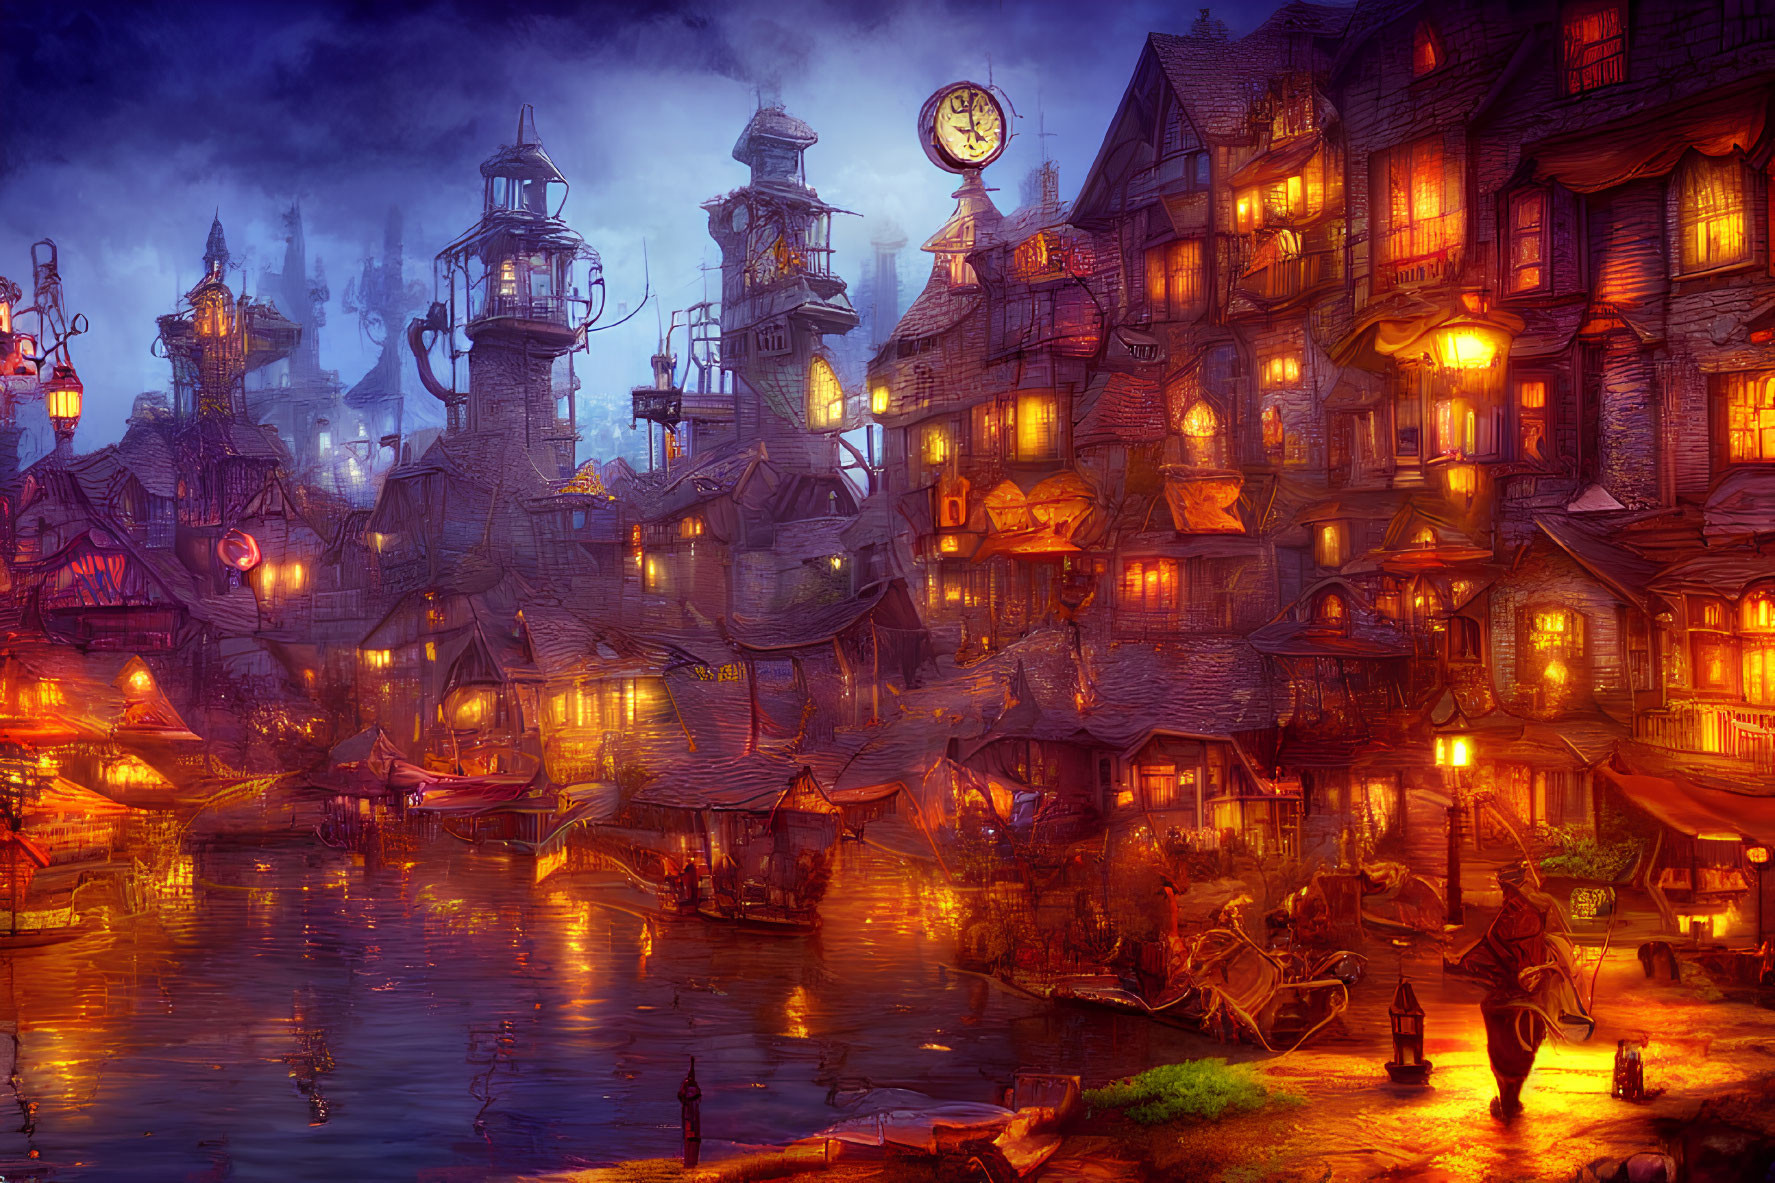 Whimsical lantern-lit town at twilight with clock tower